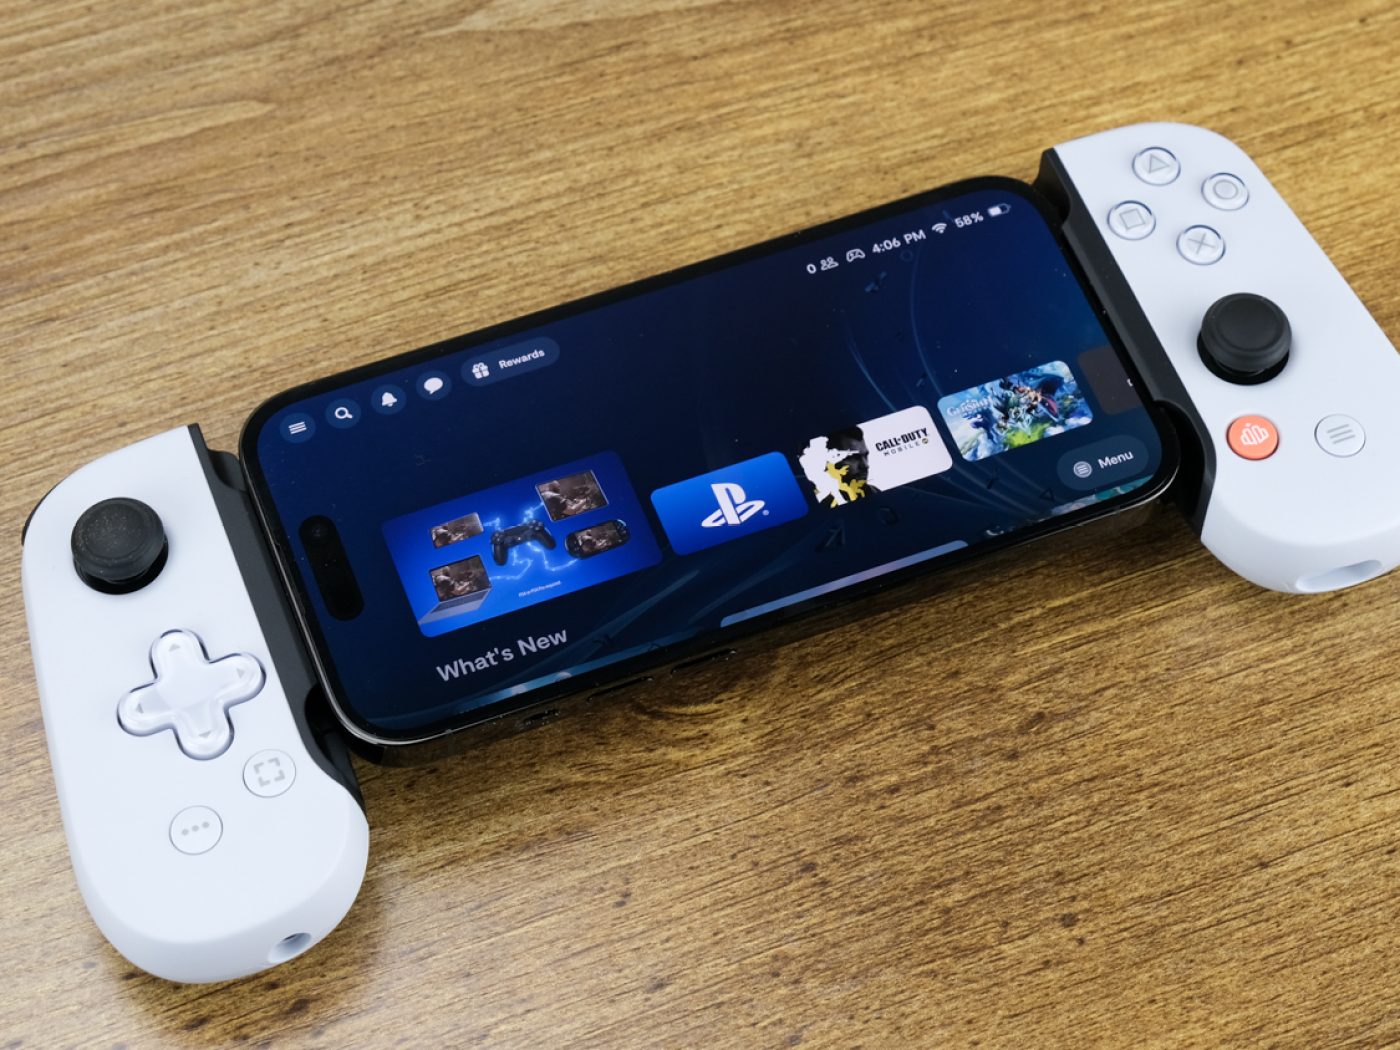 Gamevice for iPad review: Turn your tablet into an Xbox handheld